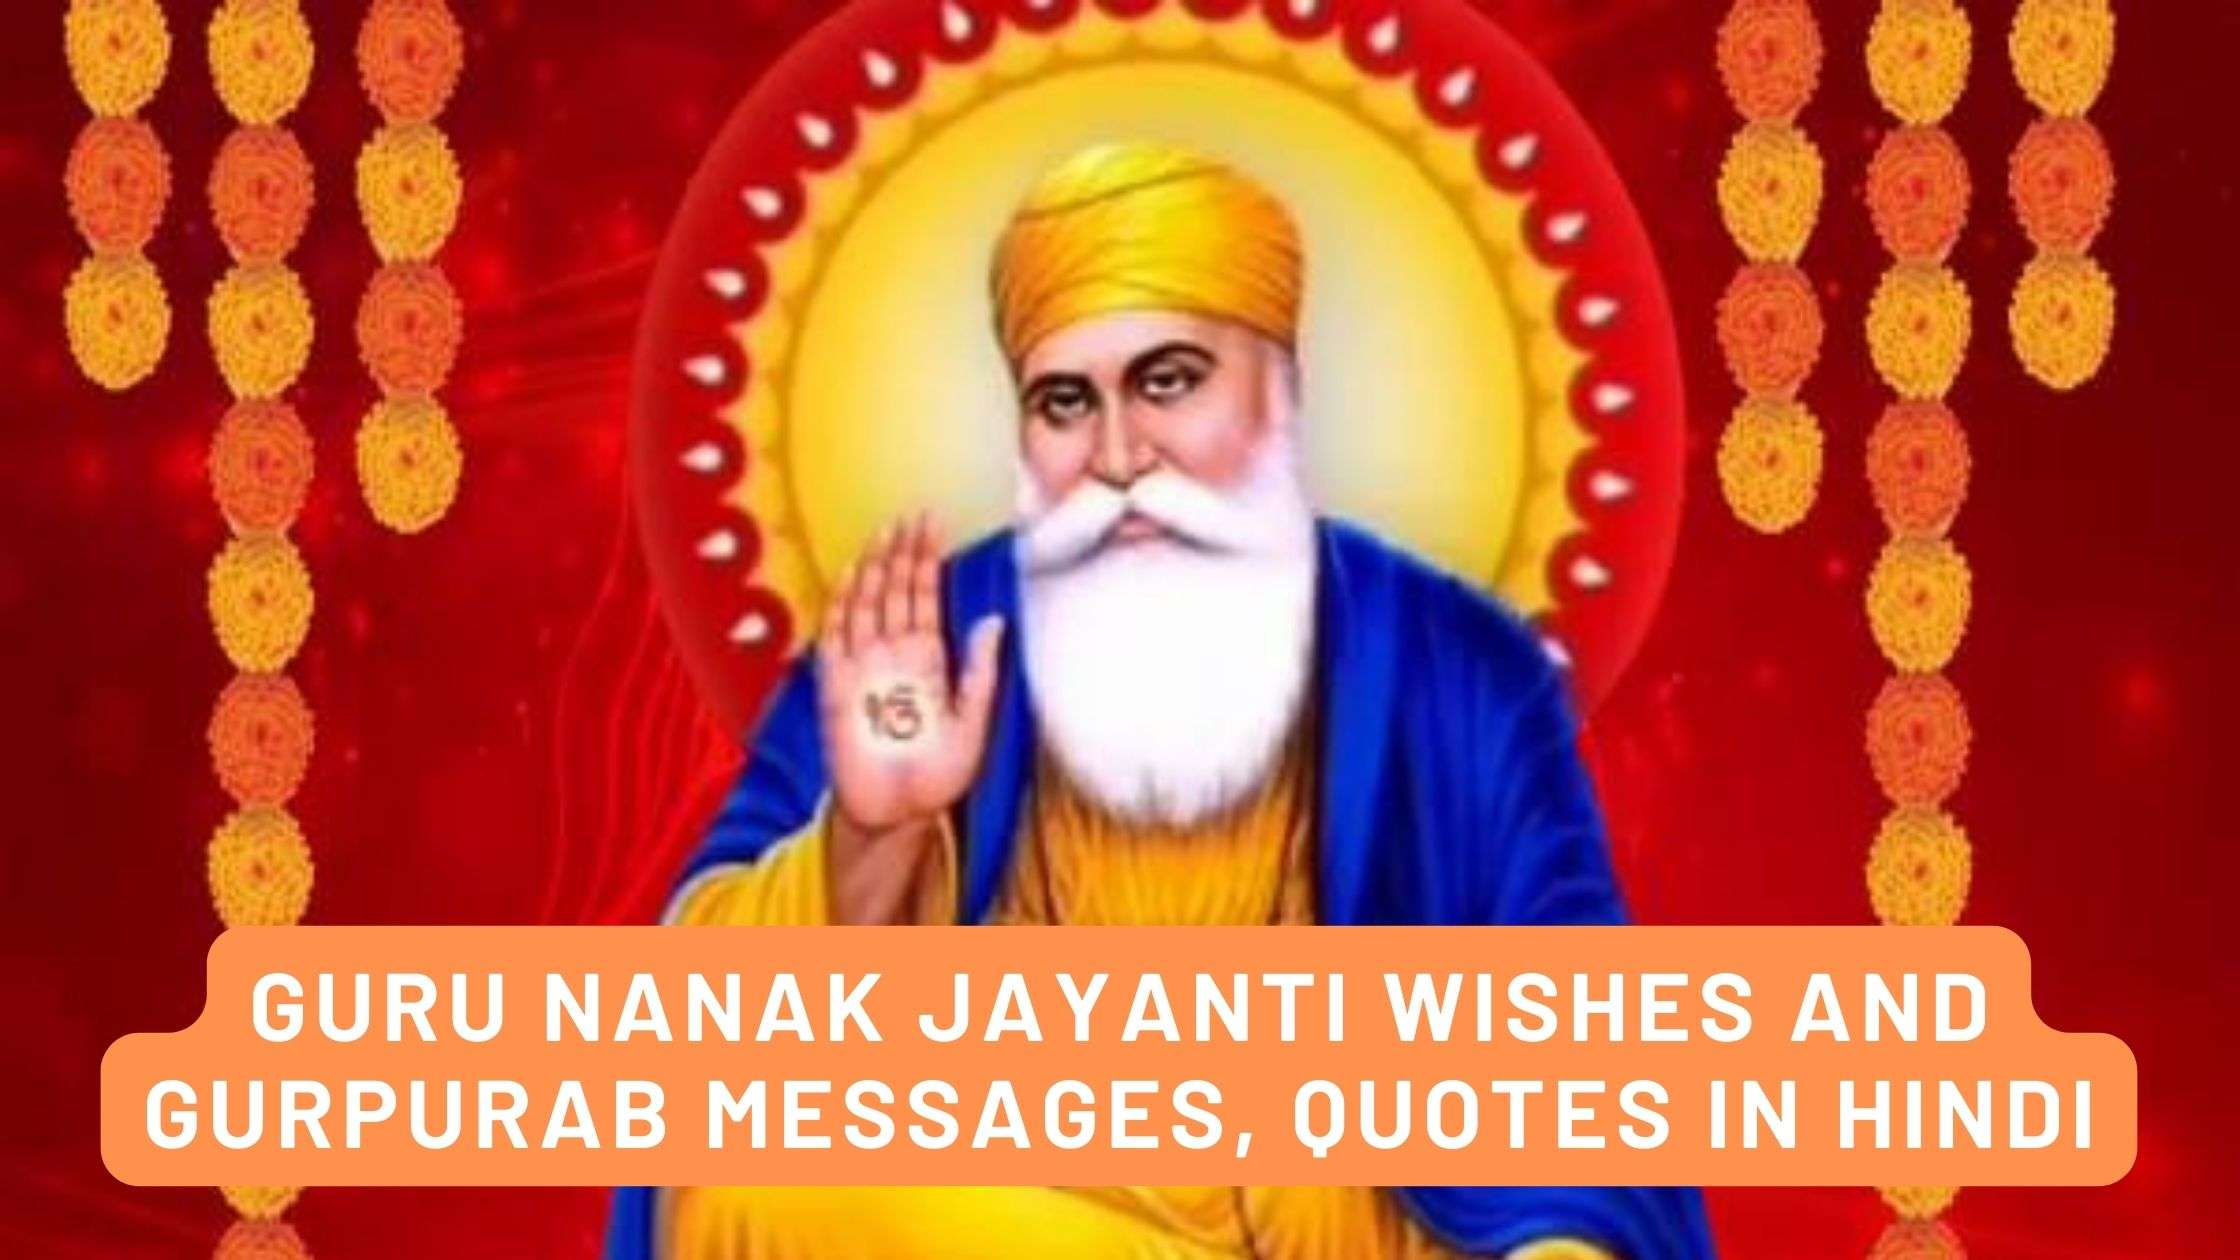 You are currently viewing Guru Nanak Jayanti Wishes In Hindi 2022 and Gurpurab Messages, Quotes